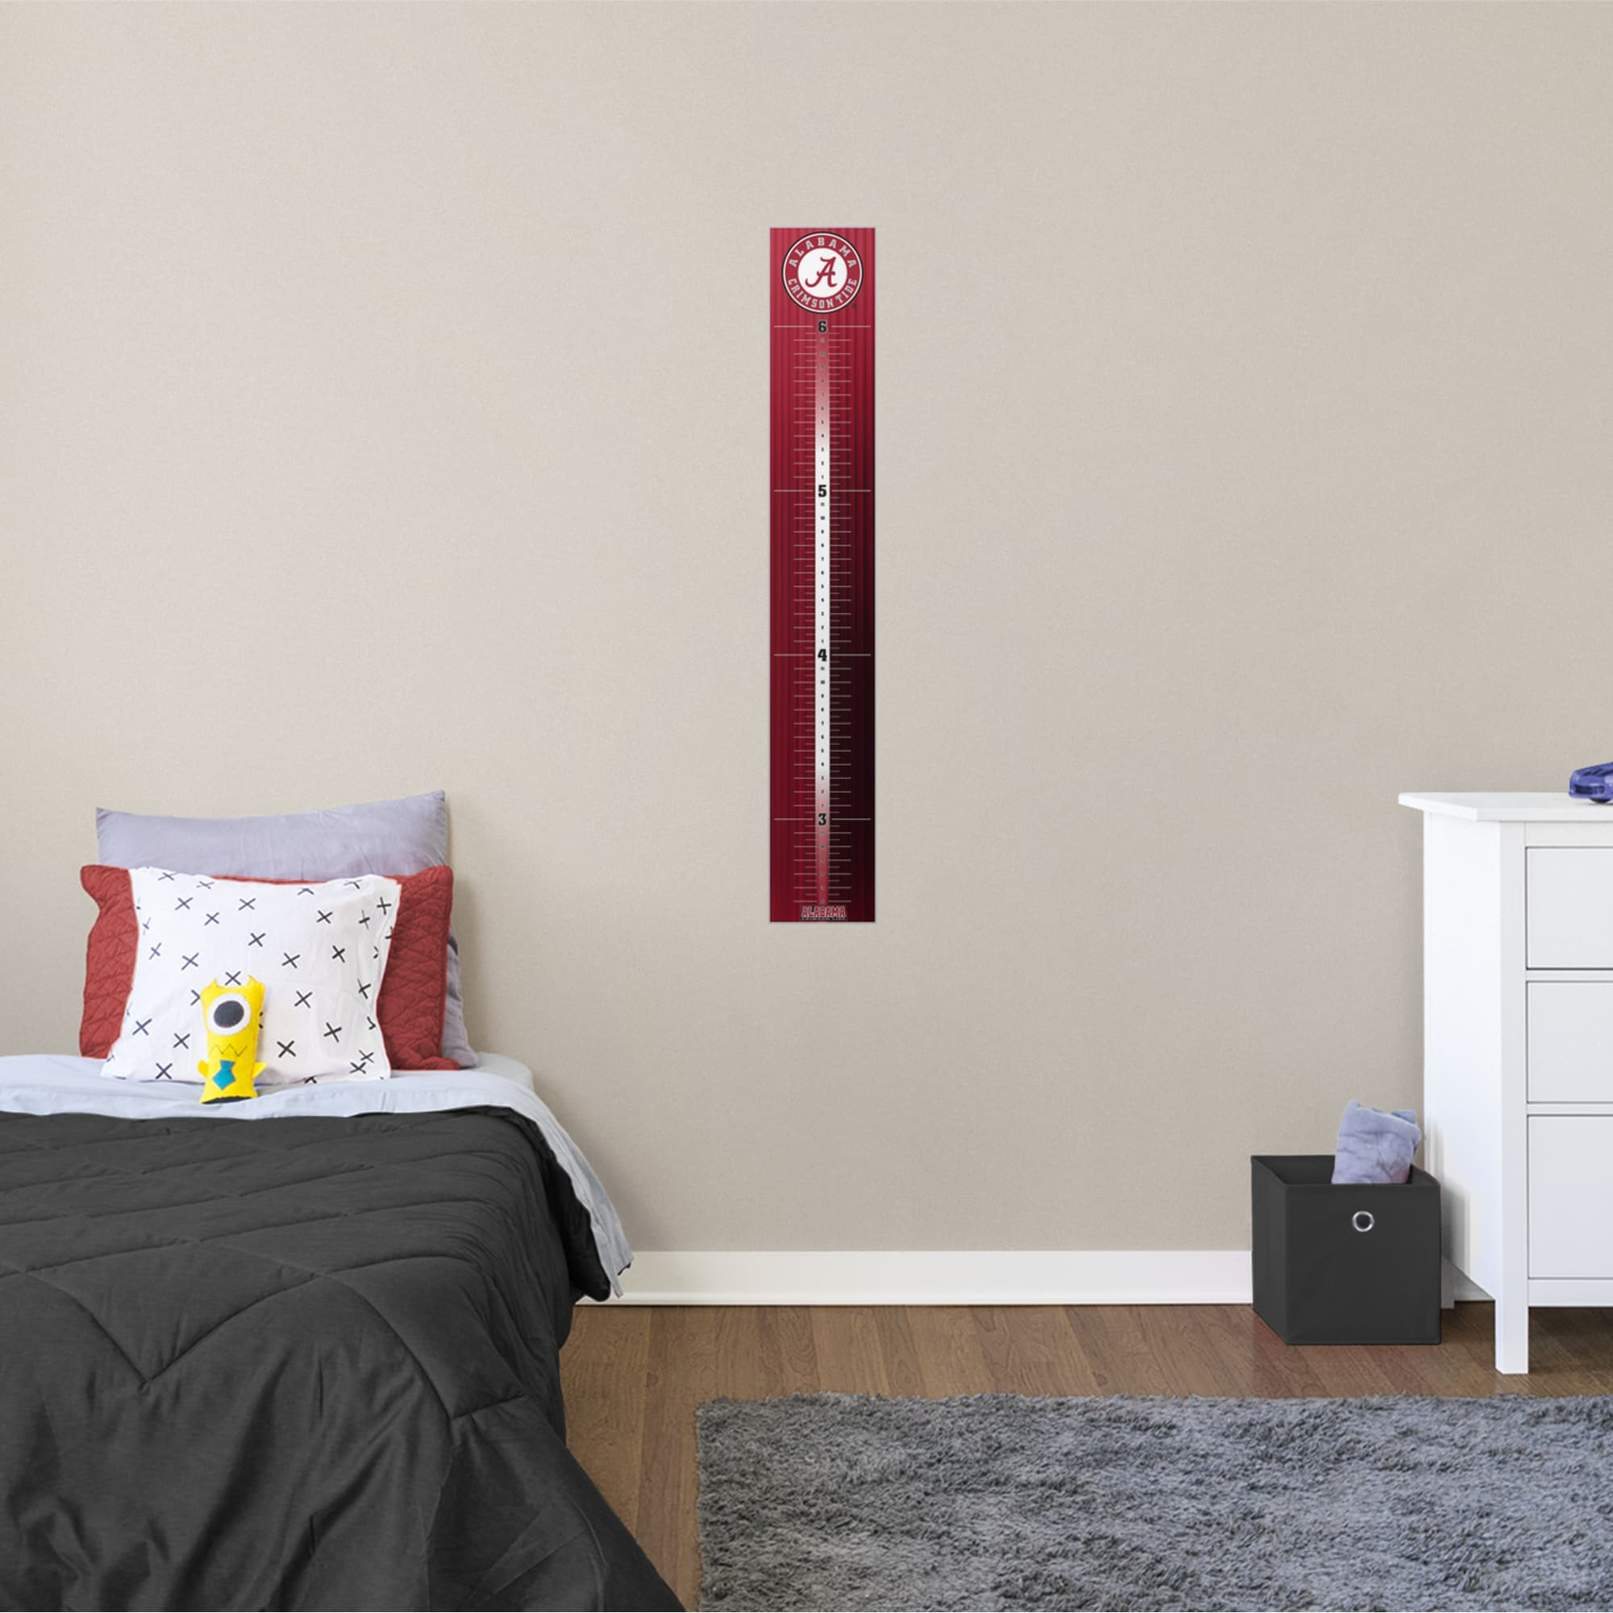 https://fathead.com/collections/alabama-crimson-tide/products/61-62643